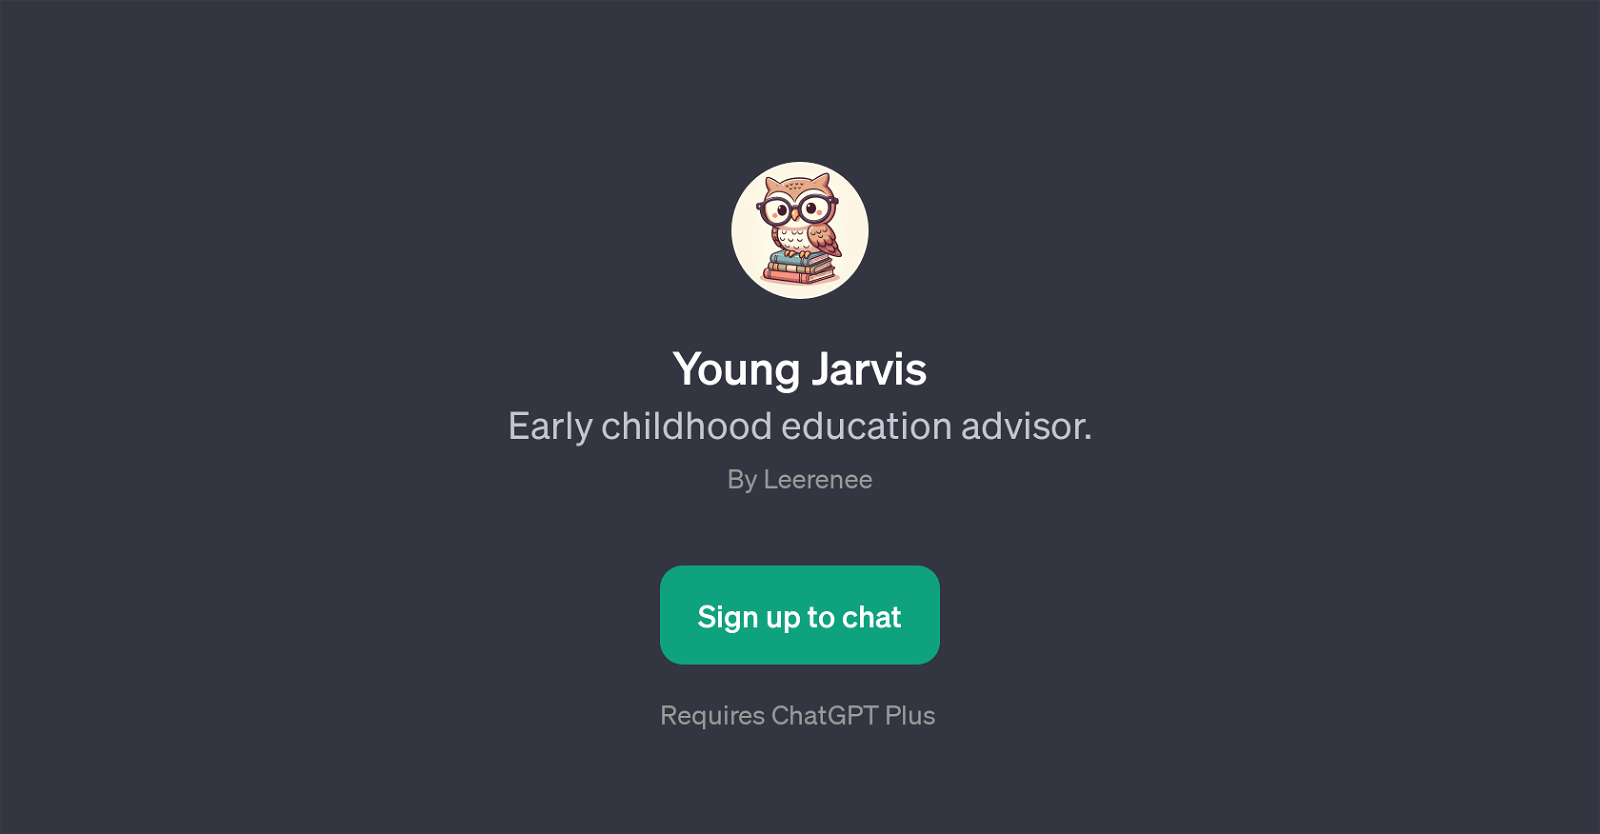 Young Jarvis website